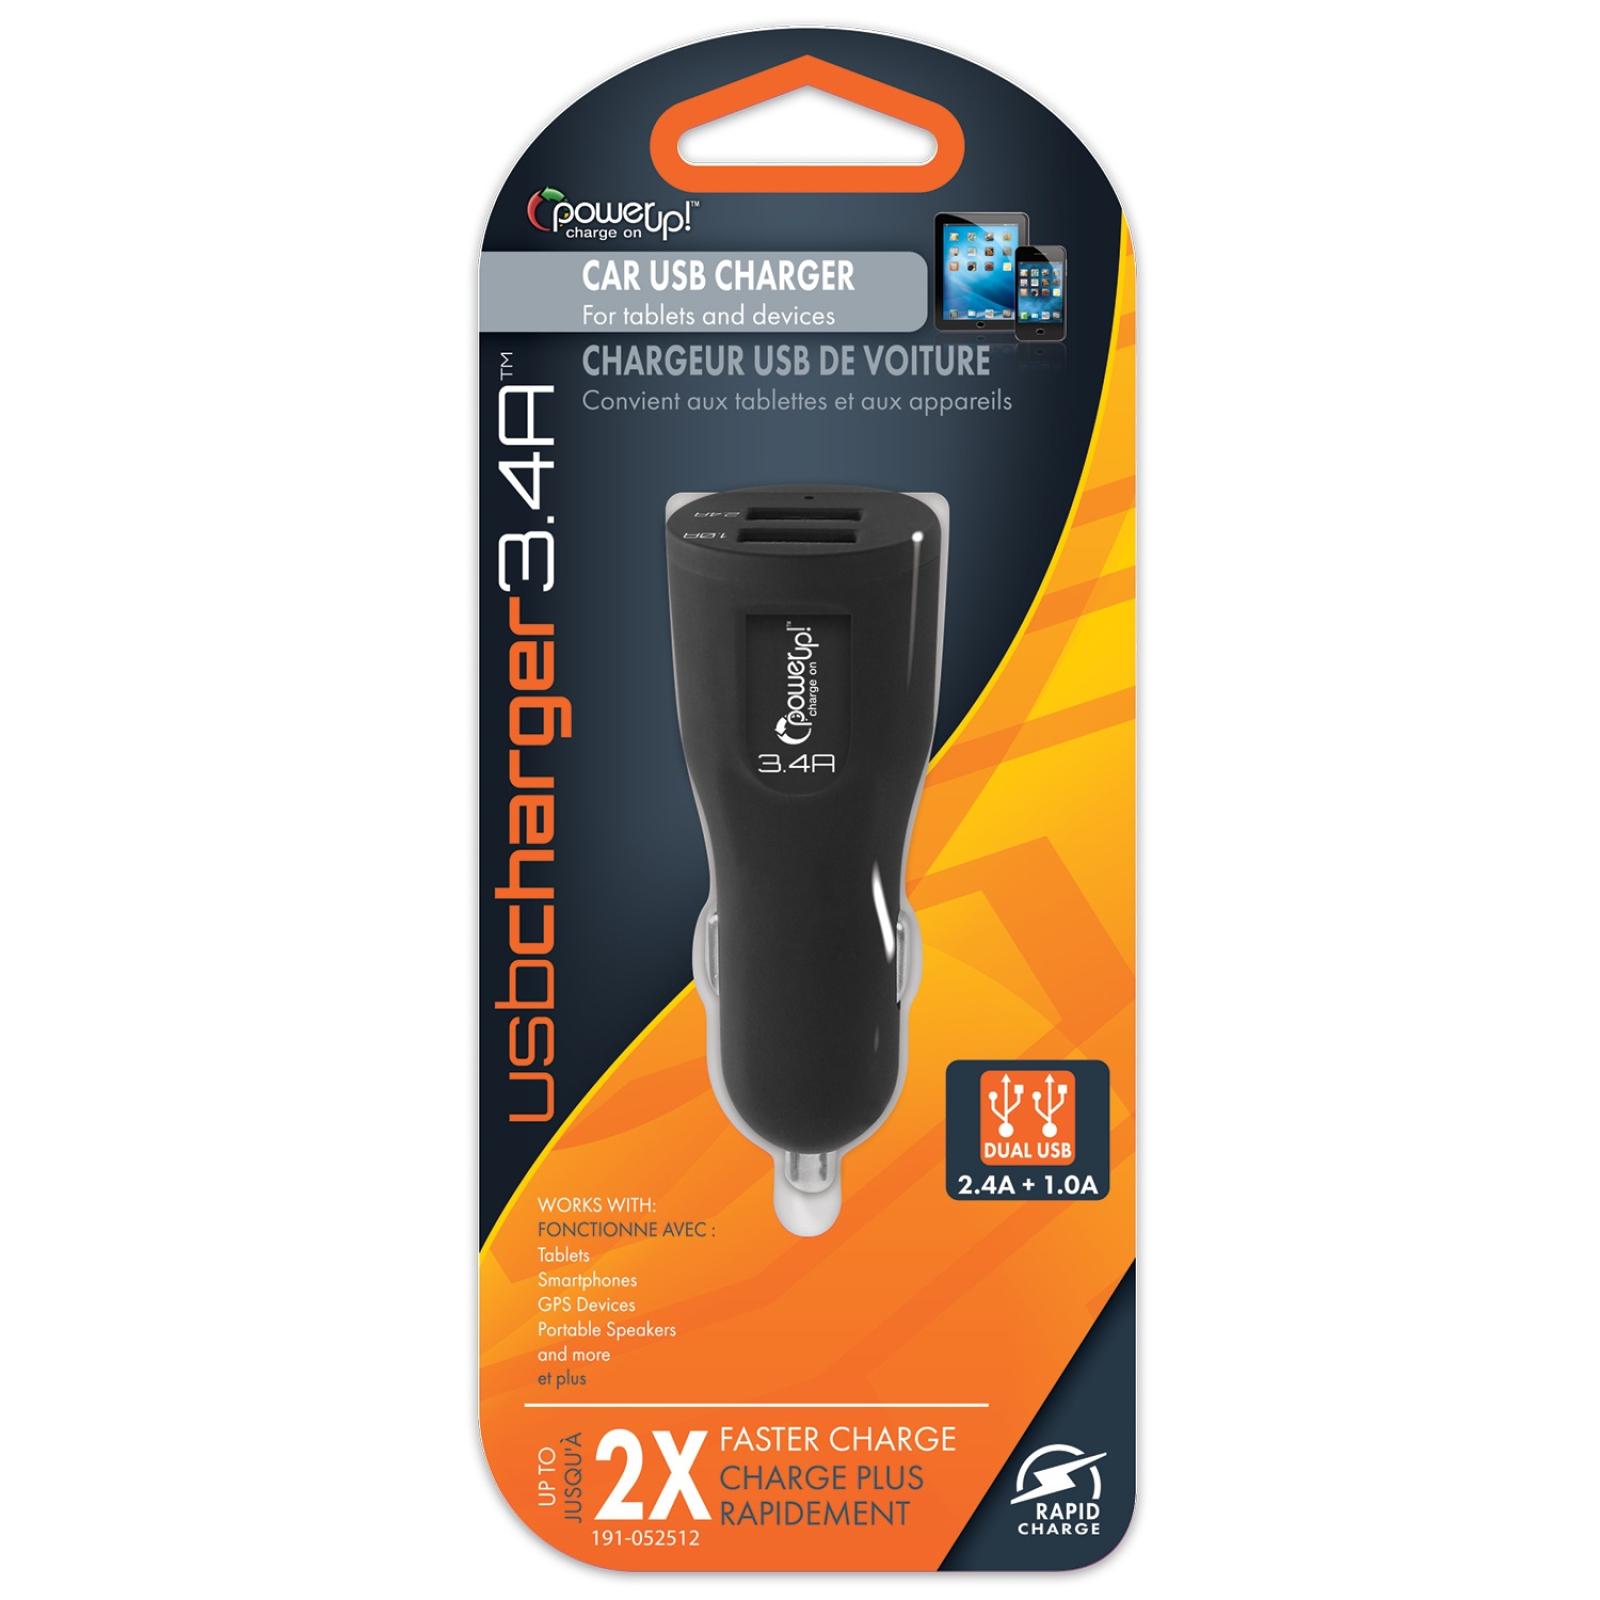 PowerUp! Charge On™ 3.4A USB Car Charger